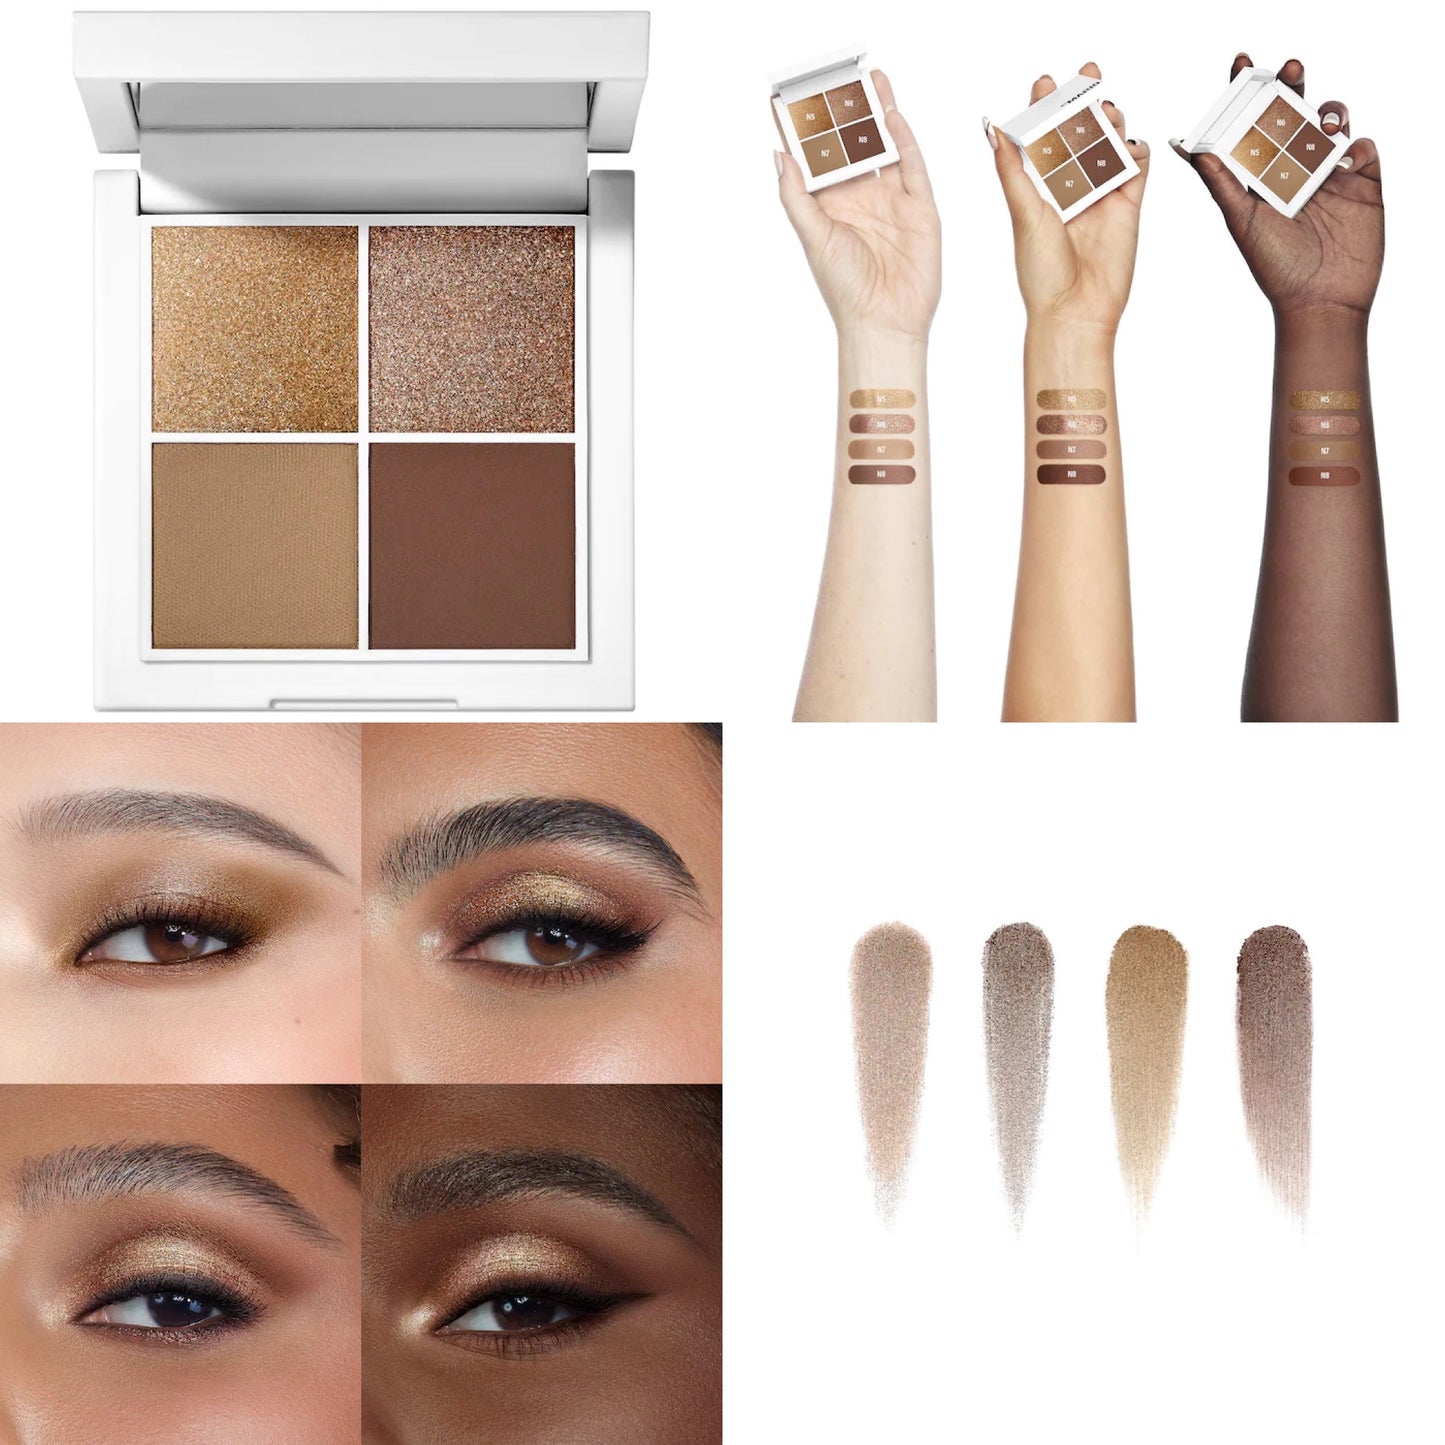 MAKEUP BY MARIO, NEW RELEASE!!! FOUR PLAY EVERYDAY EYESHADOW QUAD